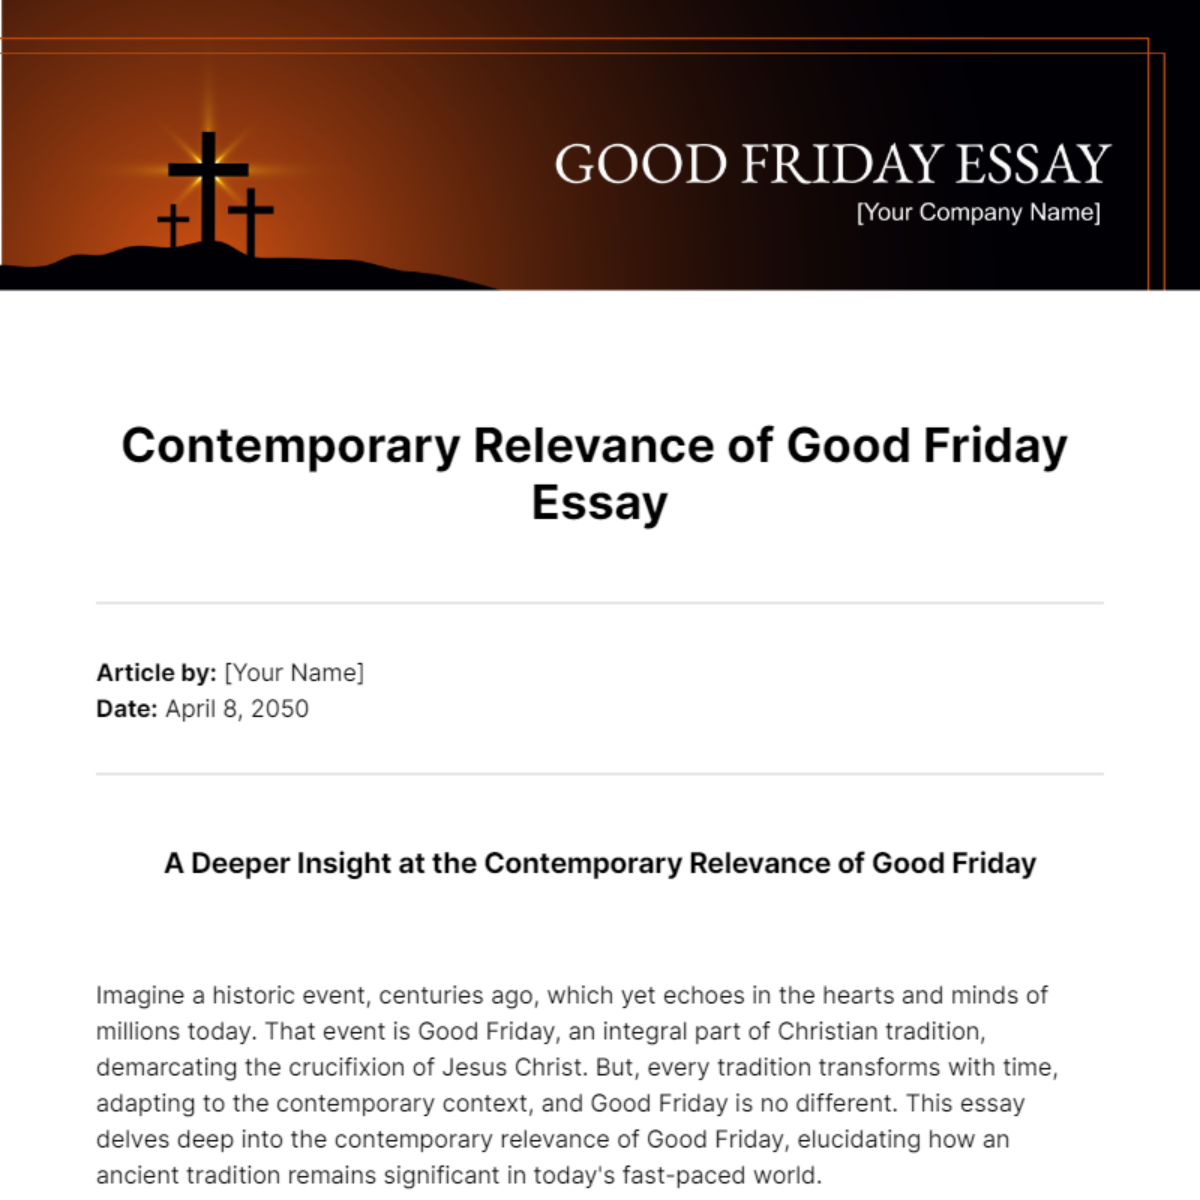 Free Contemporary Relevance of Good Friday Essay Template